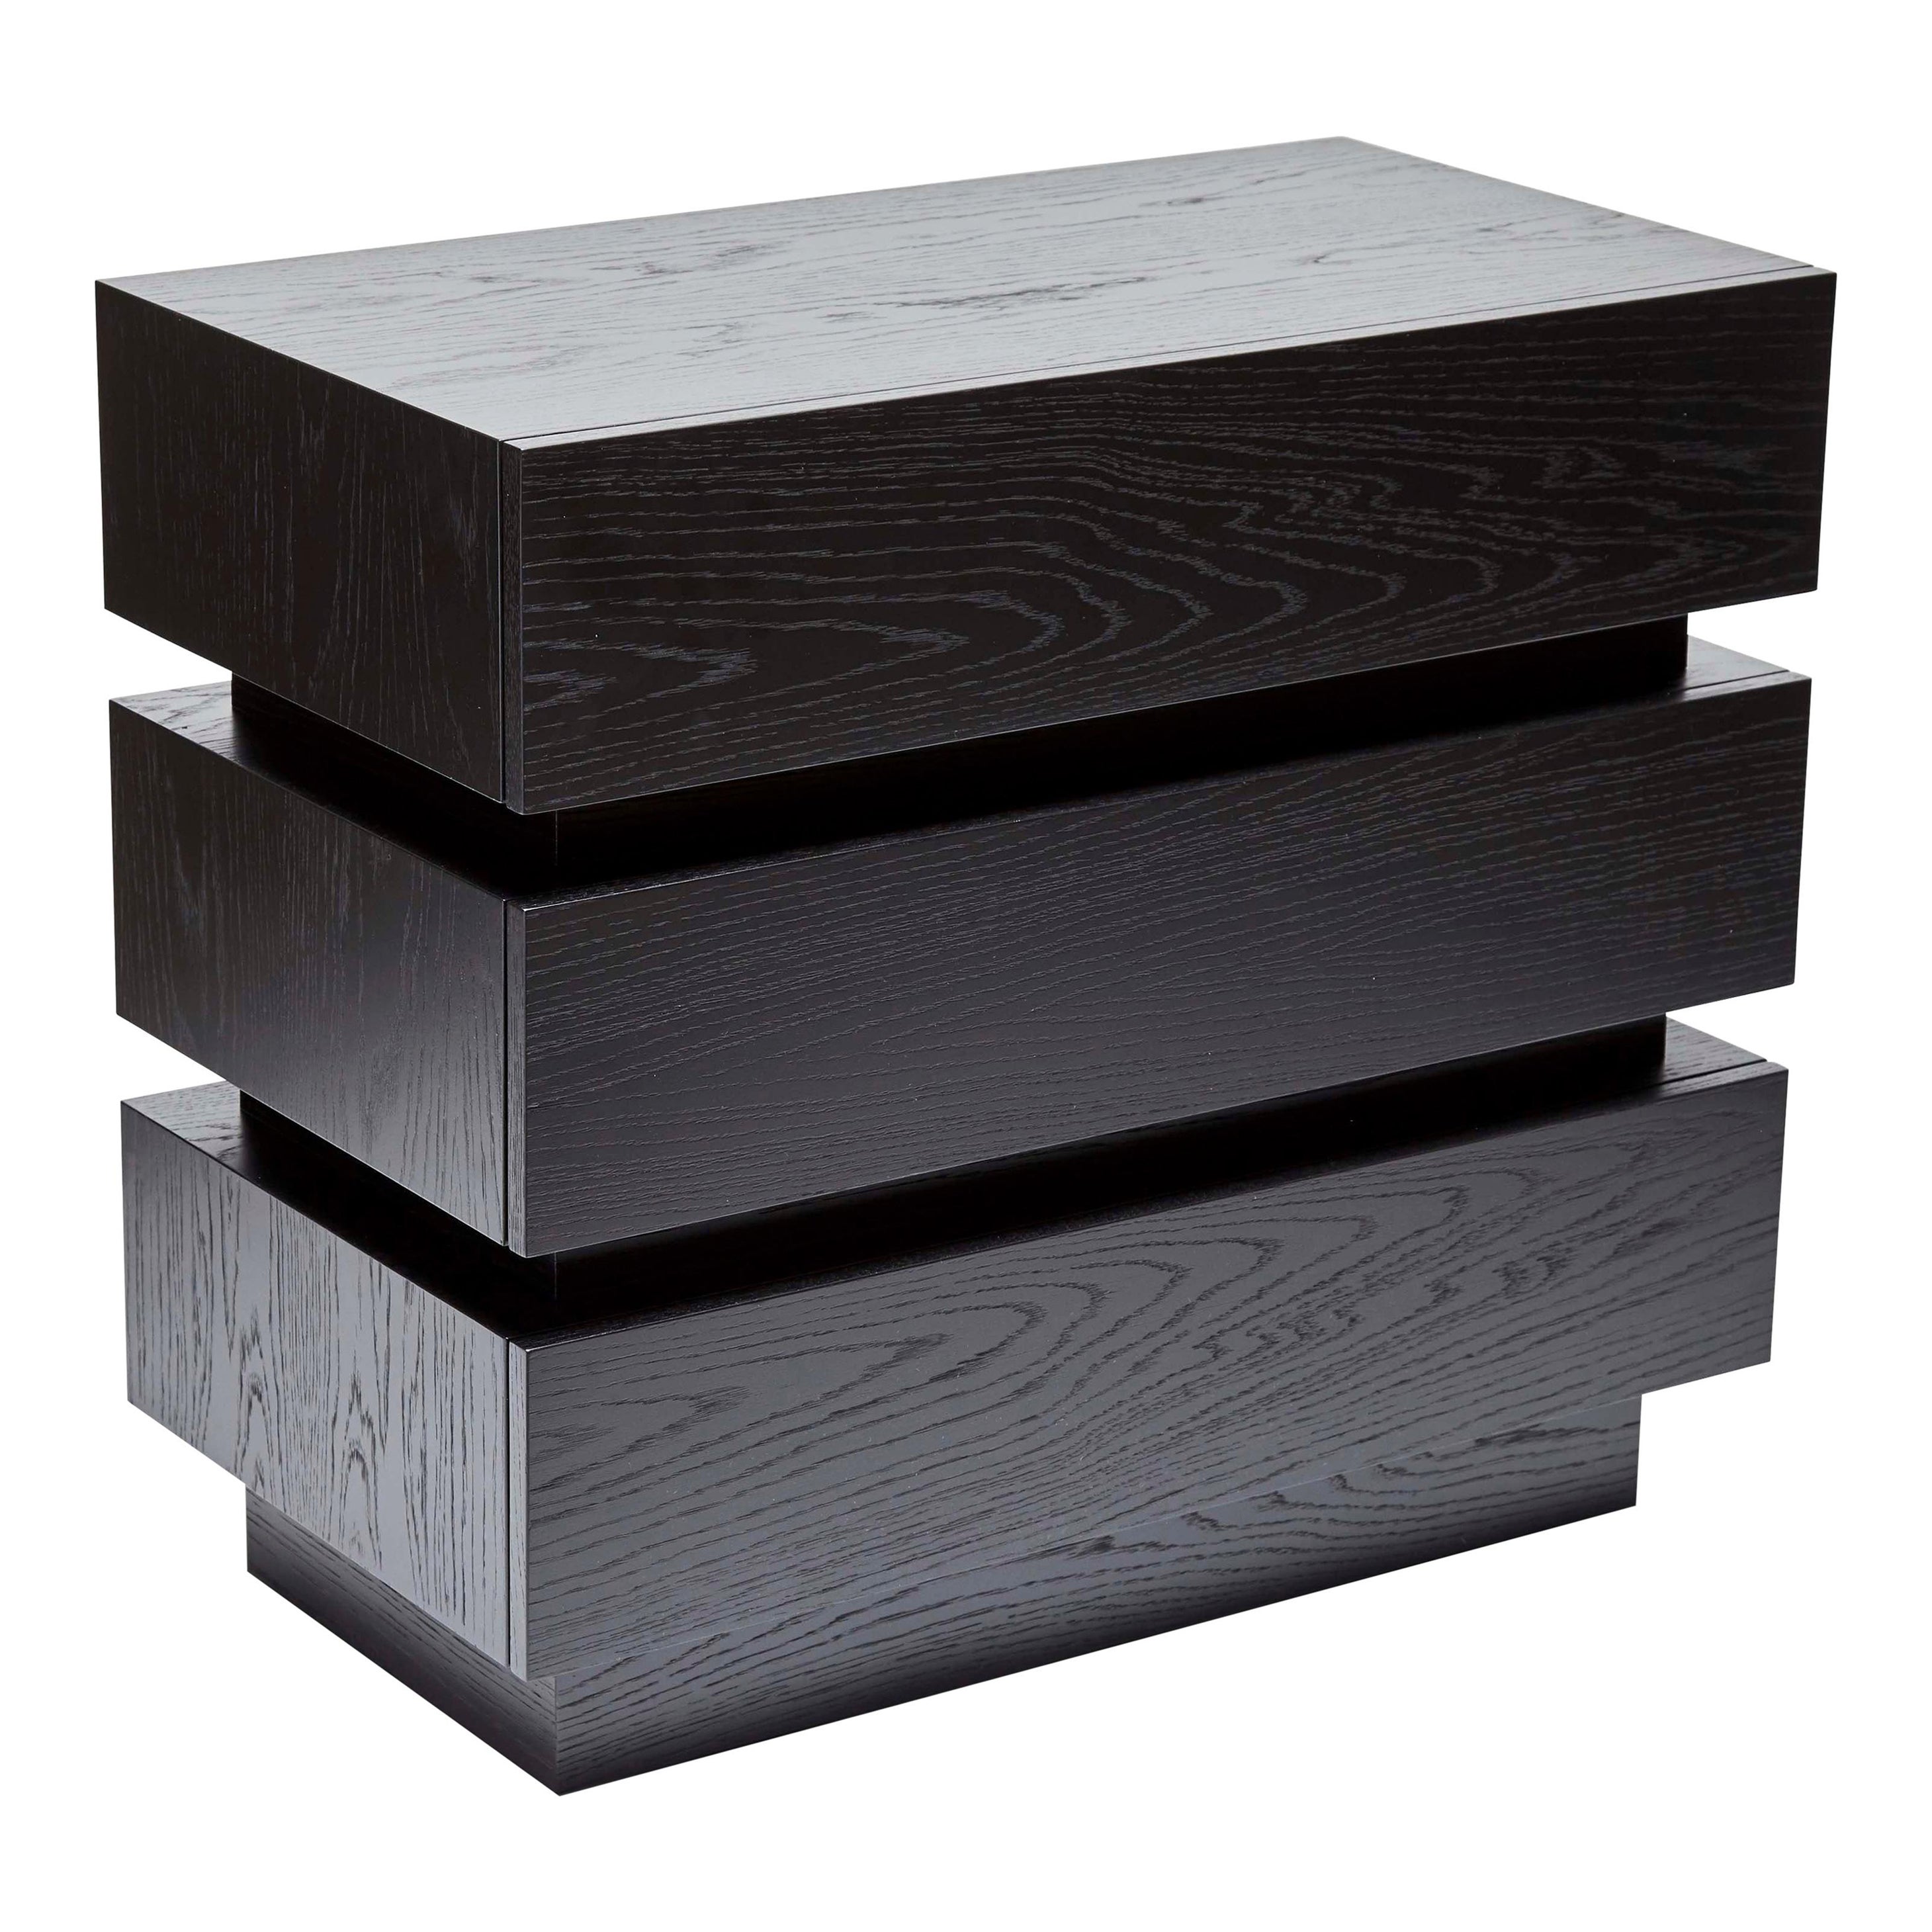 The stacked box chest is a larger modified version of the stacked box nightstand. The piece features three drawers and an inset detail that can be finished with brass plating. Available in American walnut, white oak, or pigmented oak. 

The